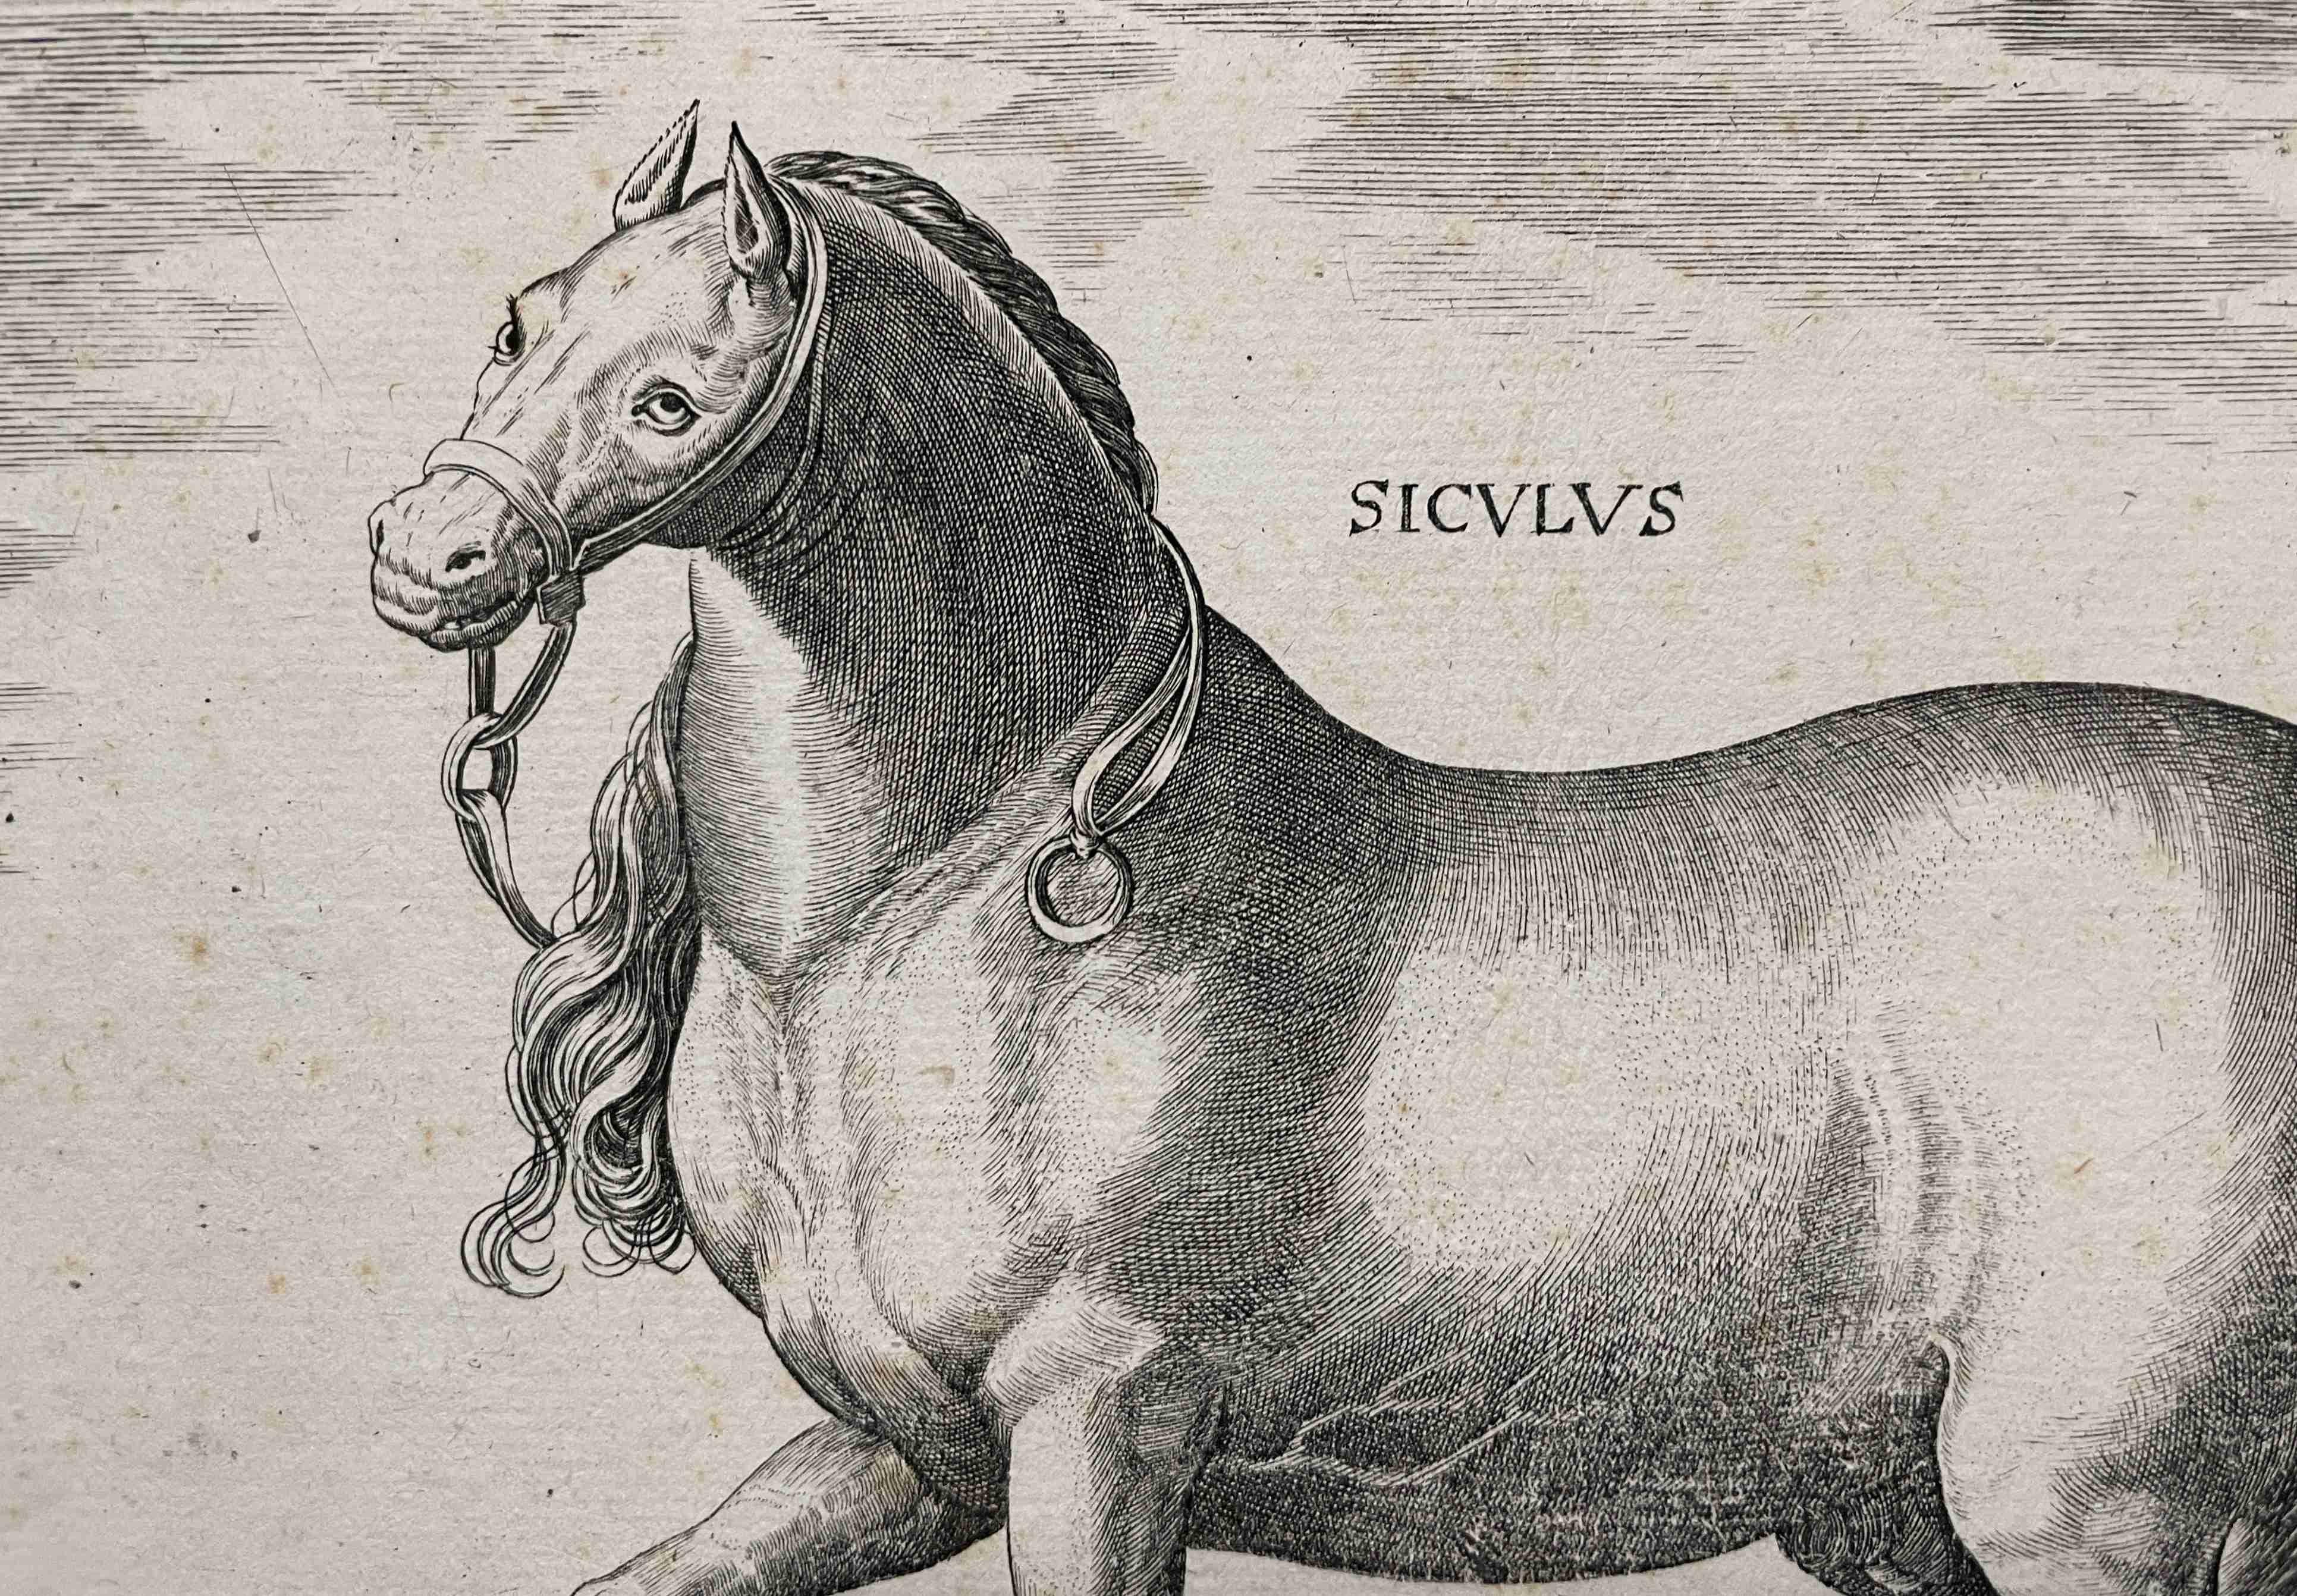 Siculus - from the portfolio “The Stables of Don John of Austria”  - Old Masters Print by Jan Van der Straet